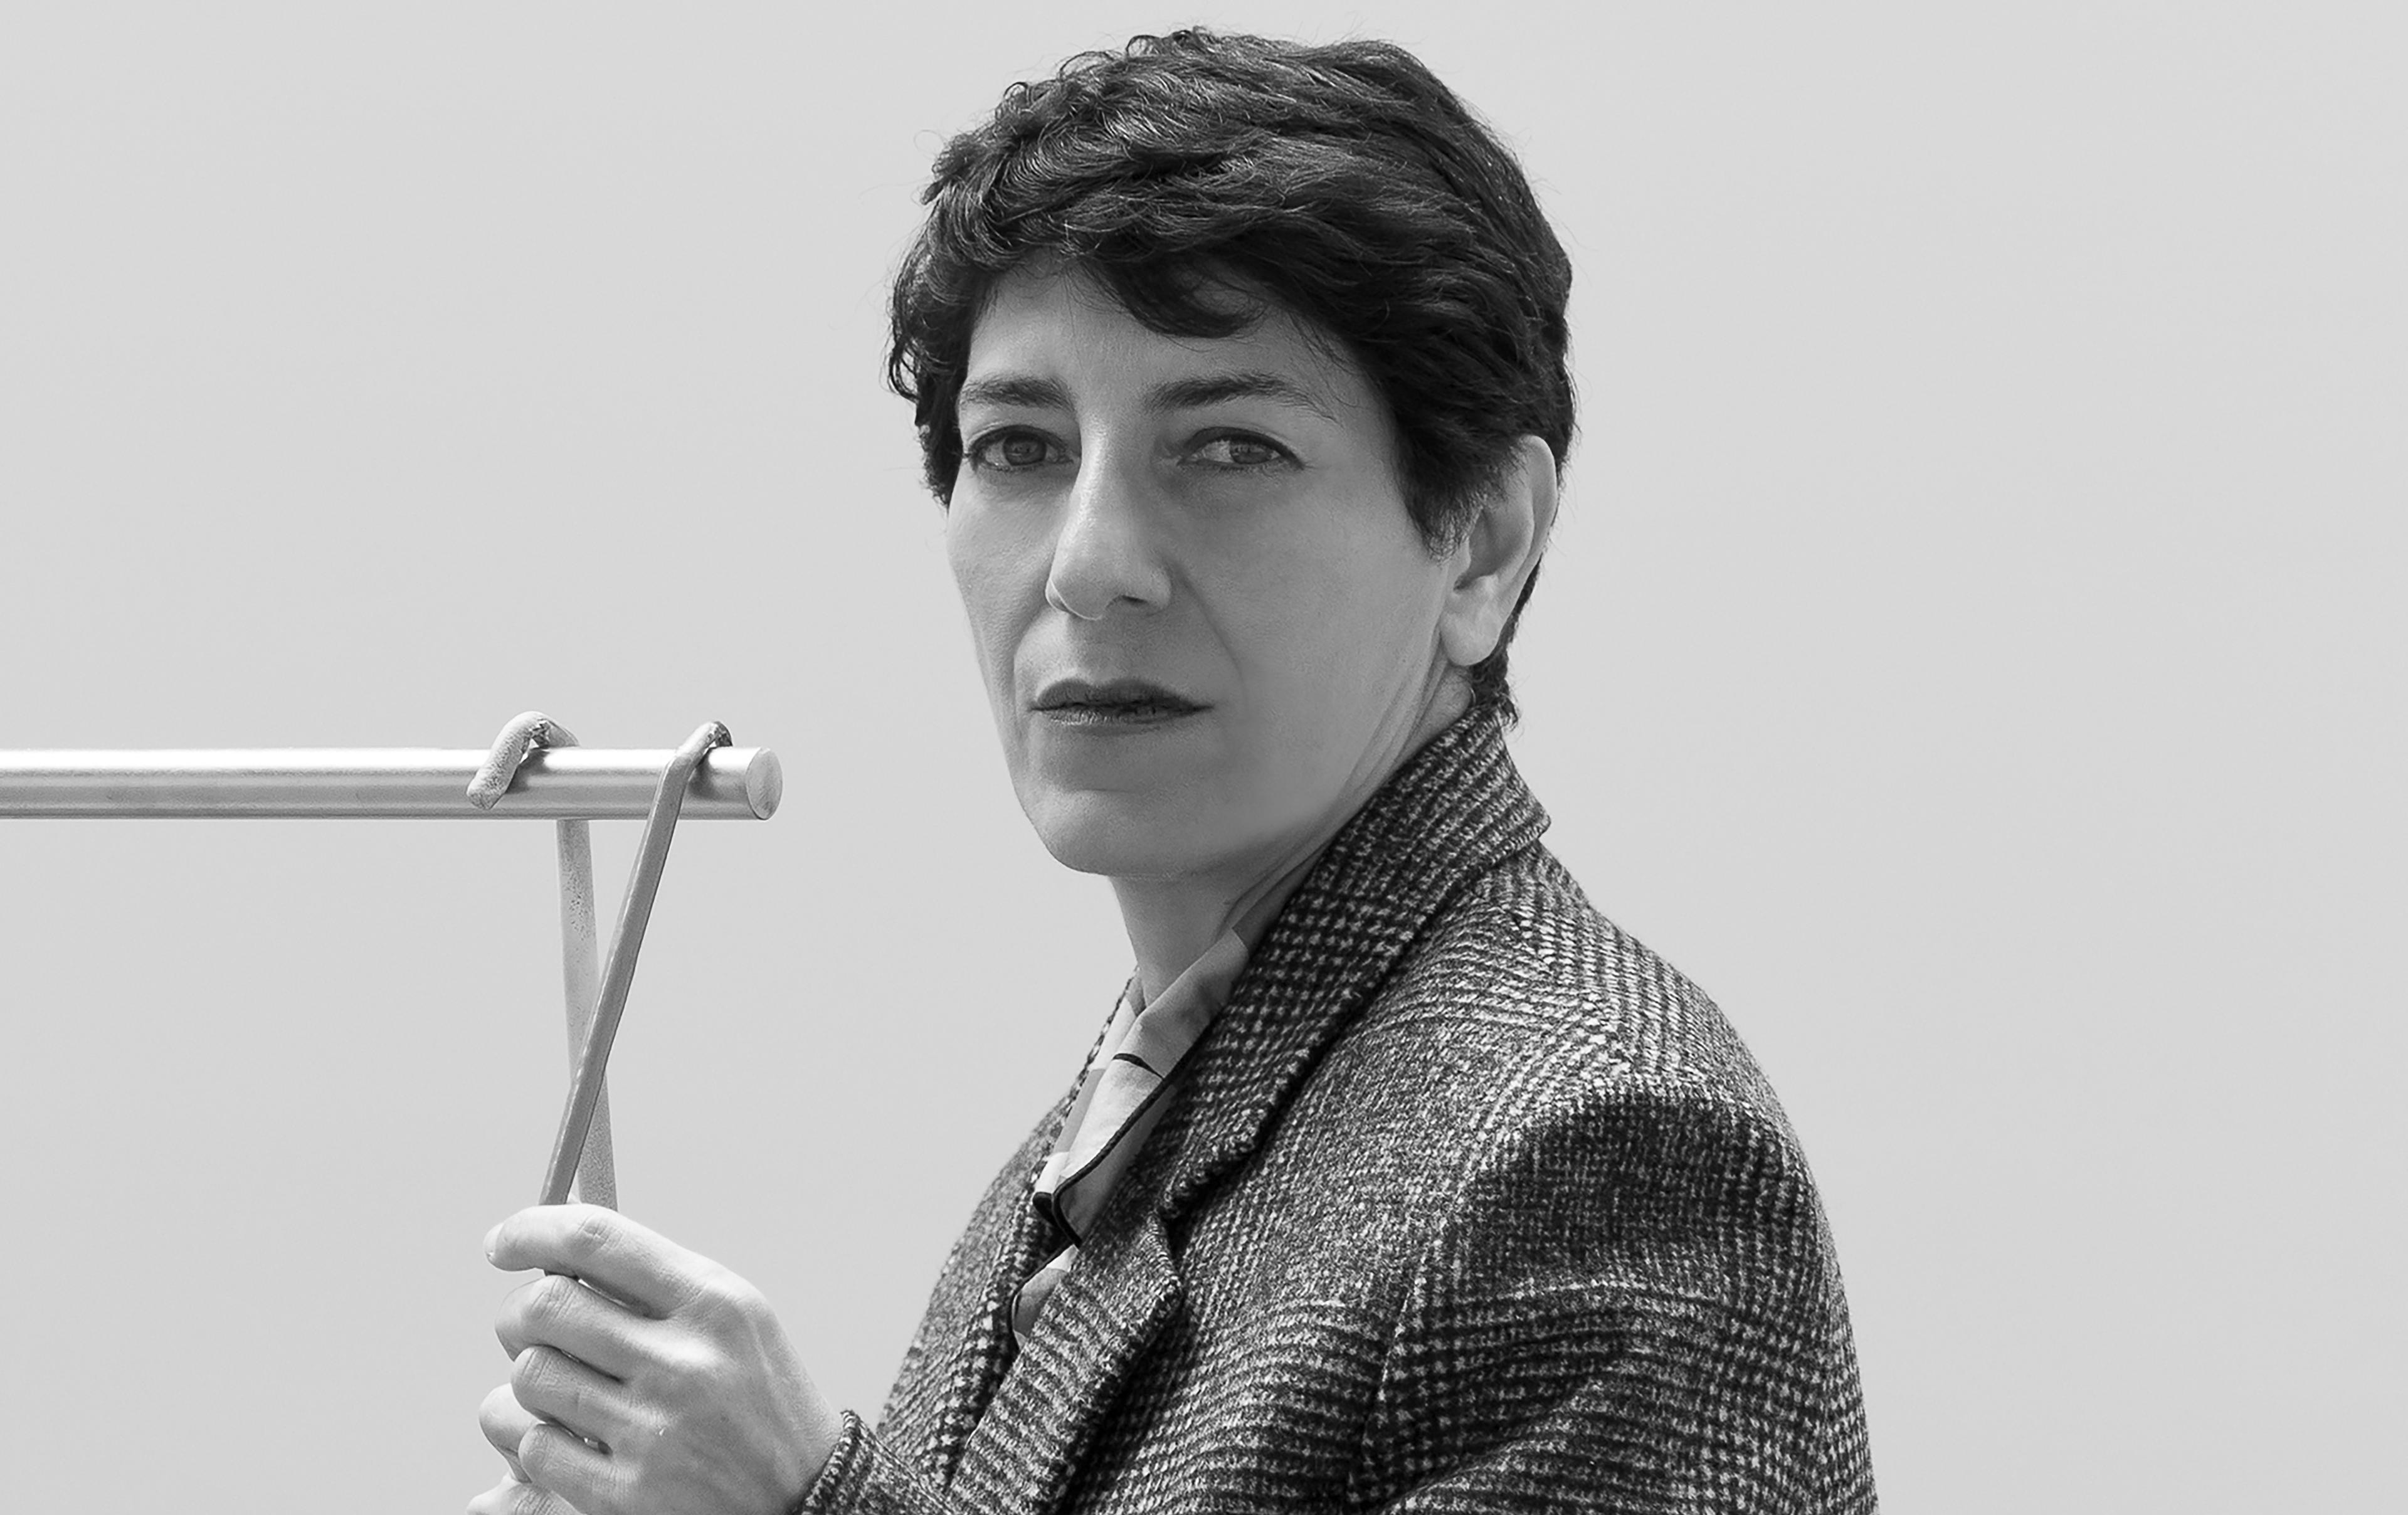 A black and white photo of Nairy Baghramian, a middle-aged woman with short dark cropped hair, wearing a tweed blazer and holding a wooden object in her hands. 